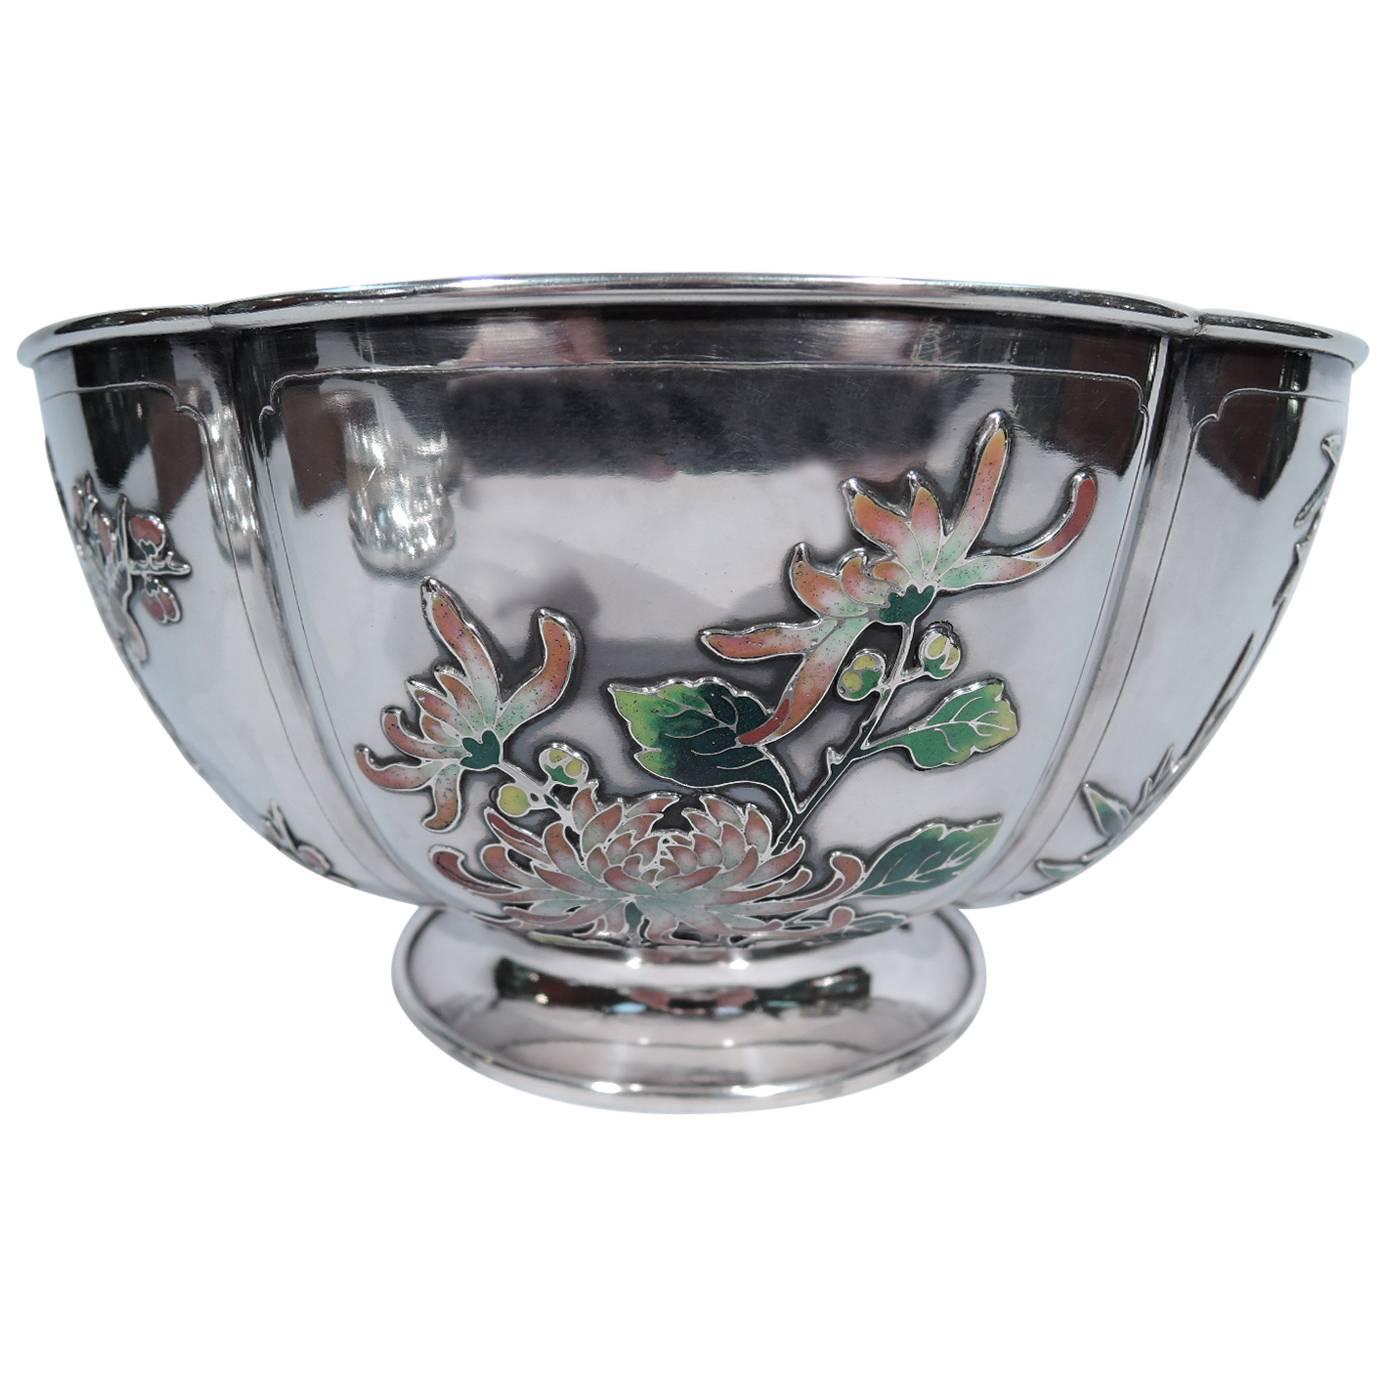 Rare Chinese Silver and Enamel Bowl with Bamboo and Chrysanthemum